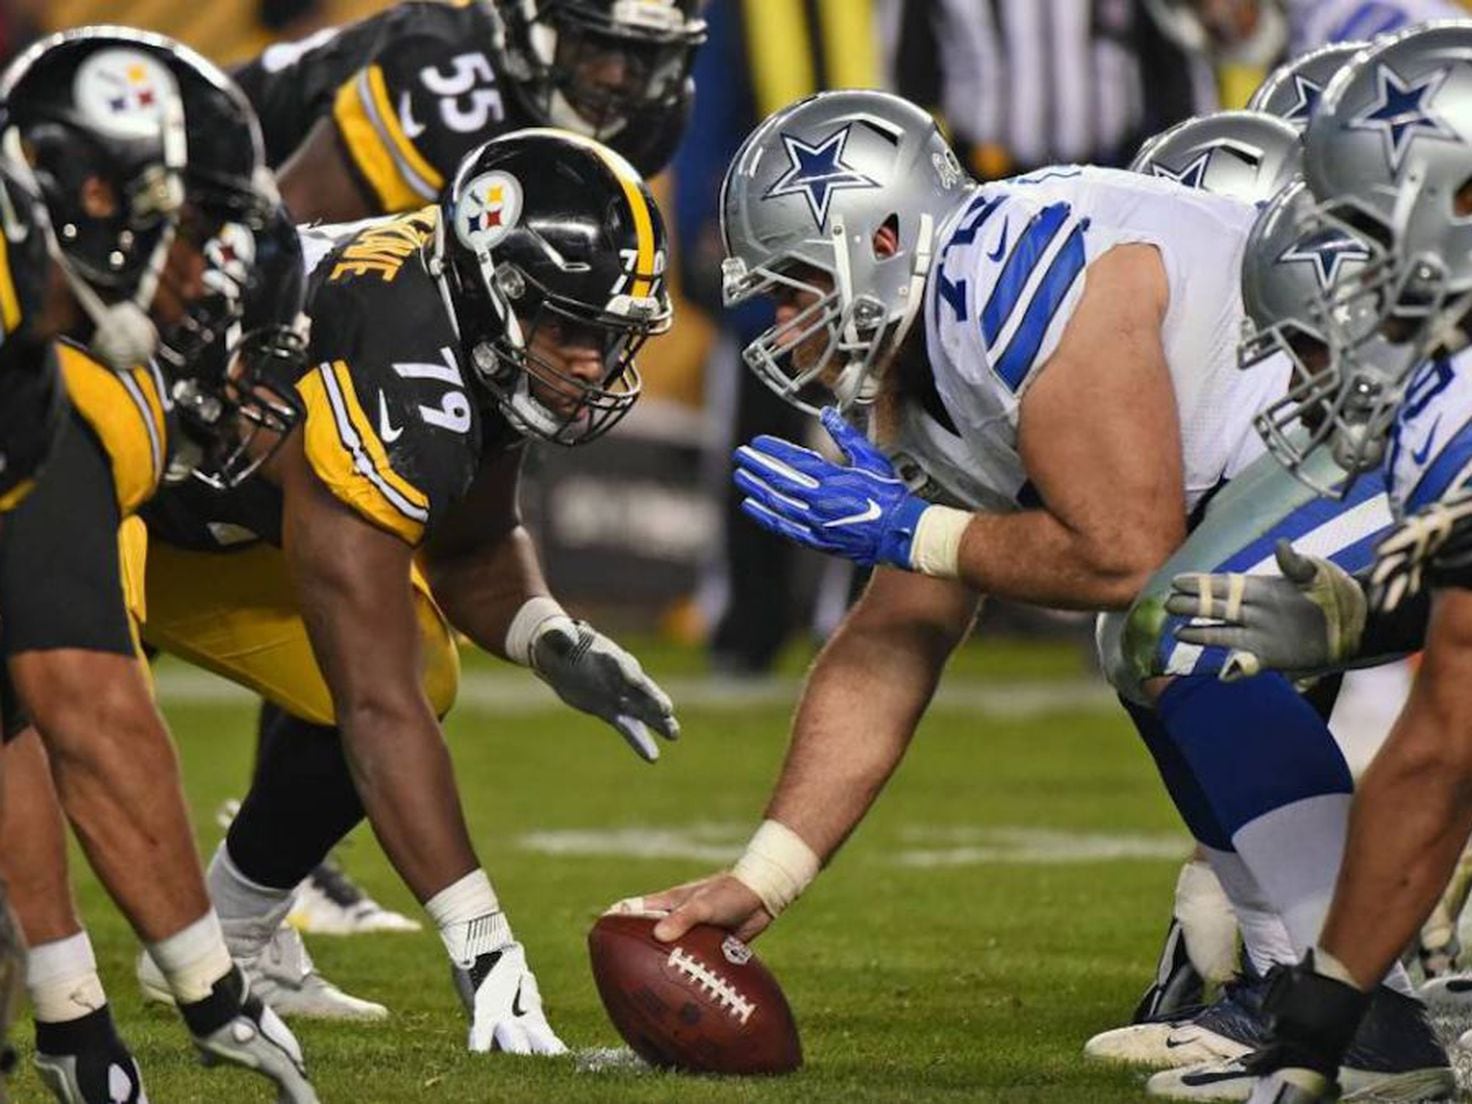 Cowboys vs. Steelers Live Stream: How to Watch Online